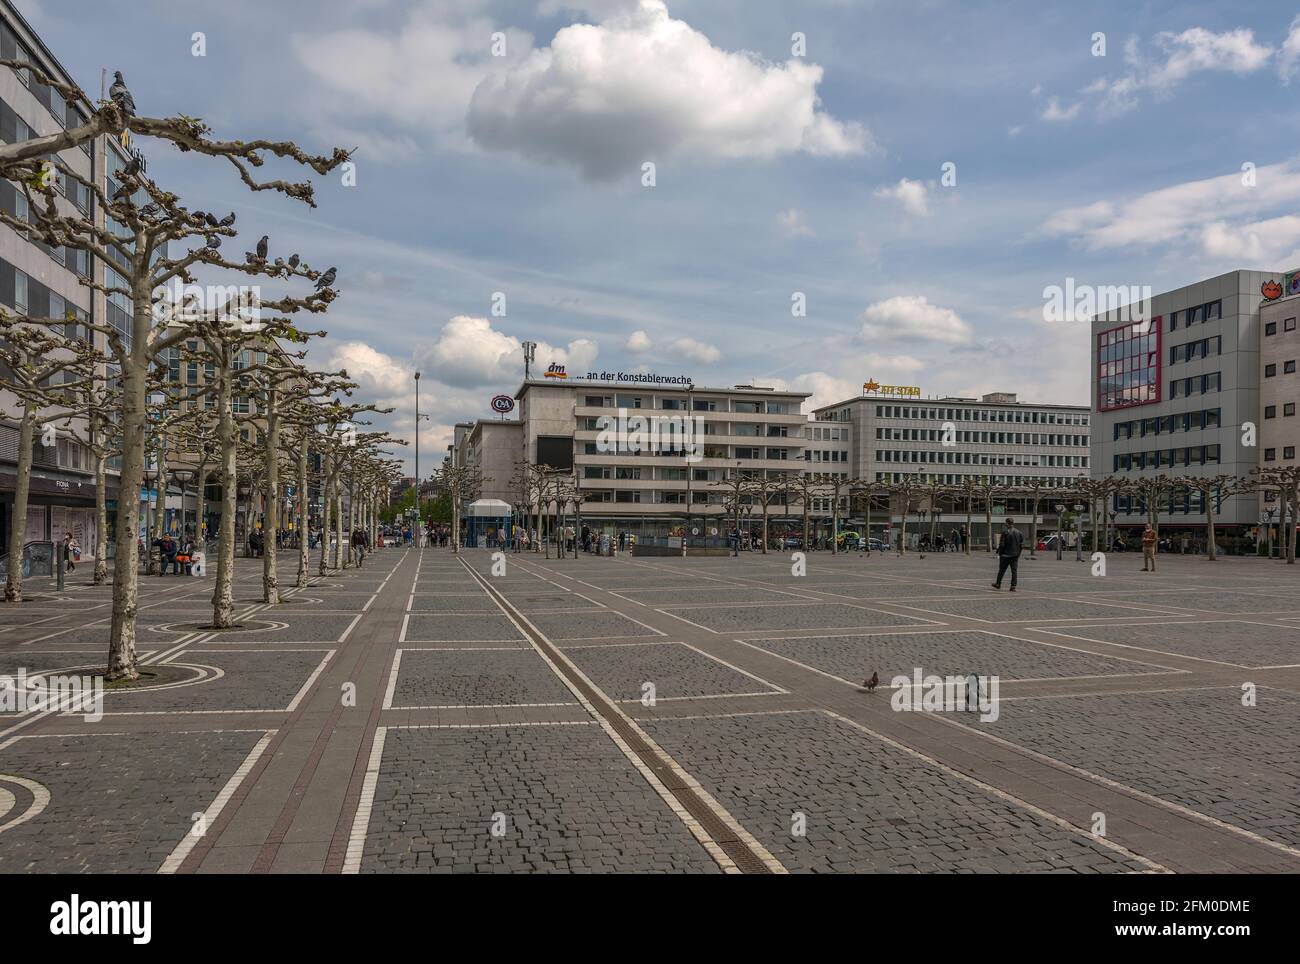 The large Konstablerwache square in downtown Frankfurt, Germany Stock Photo